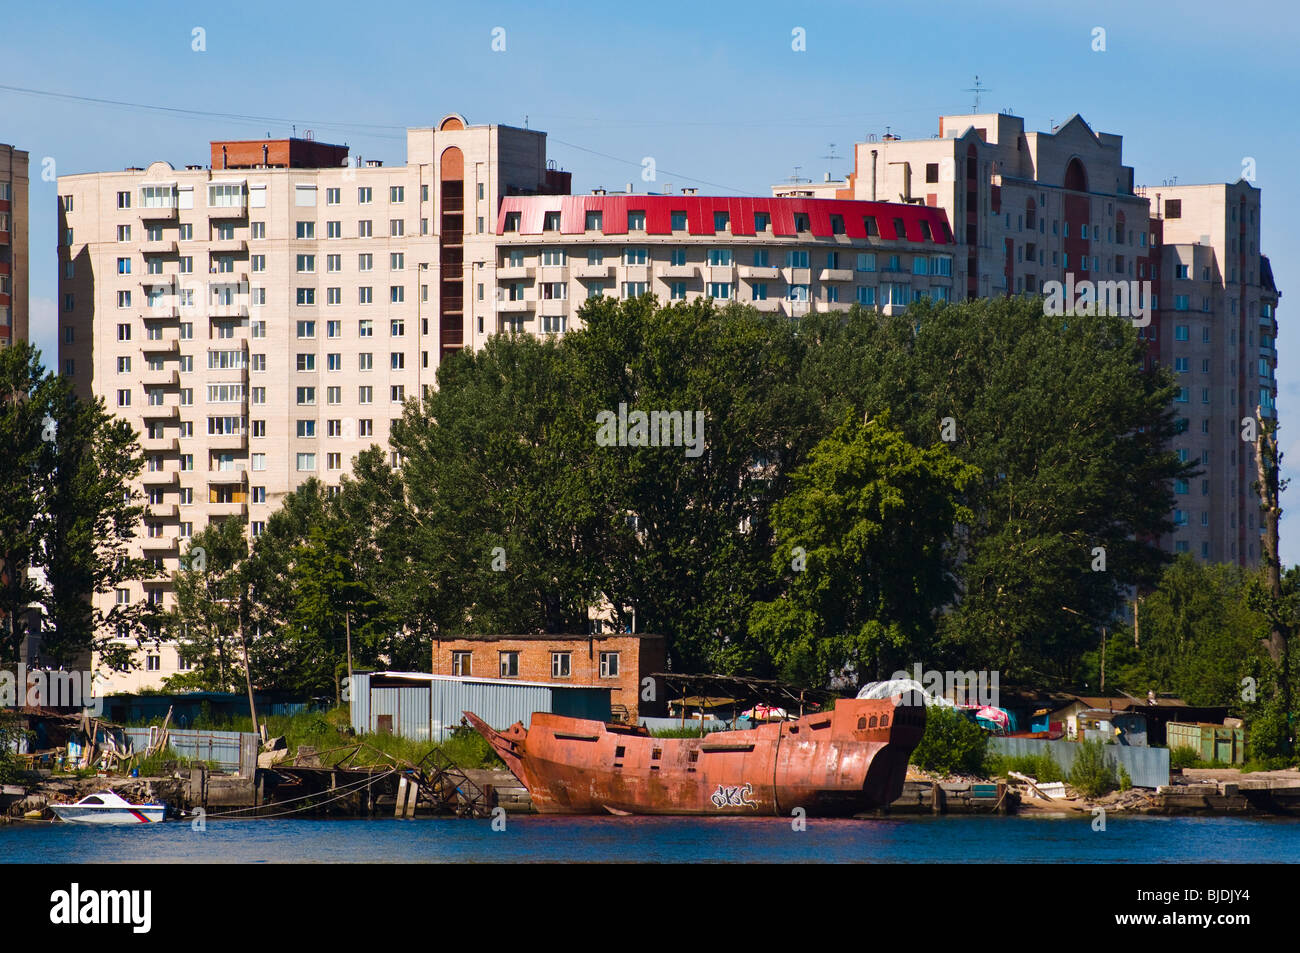 Boatyard and hull of a replica galleon in front of massive apartment block near mouth of River Neva, St Petersburg, Russia Stock Photo